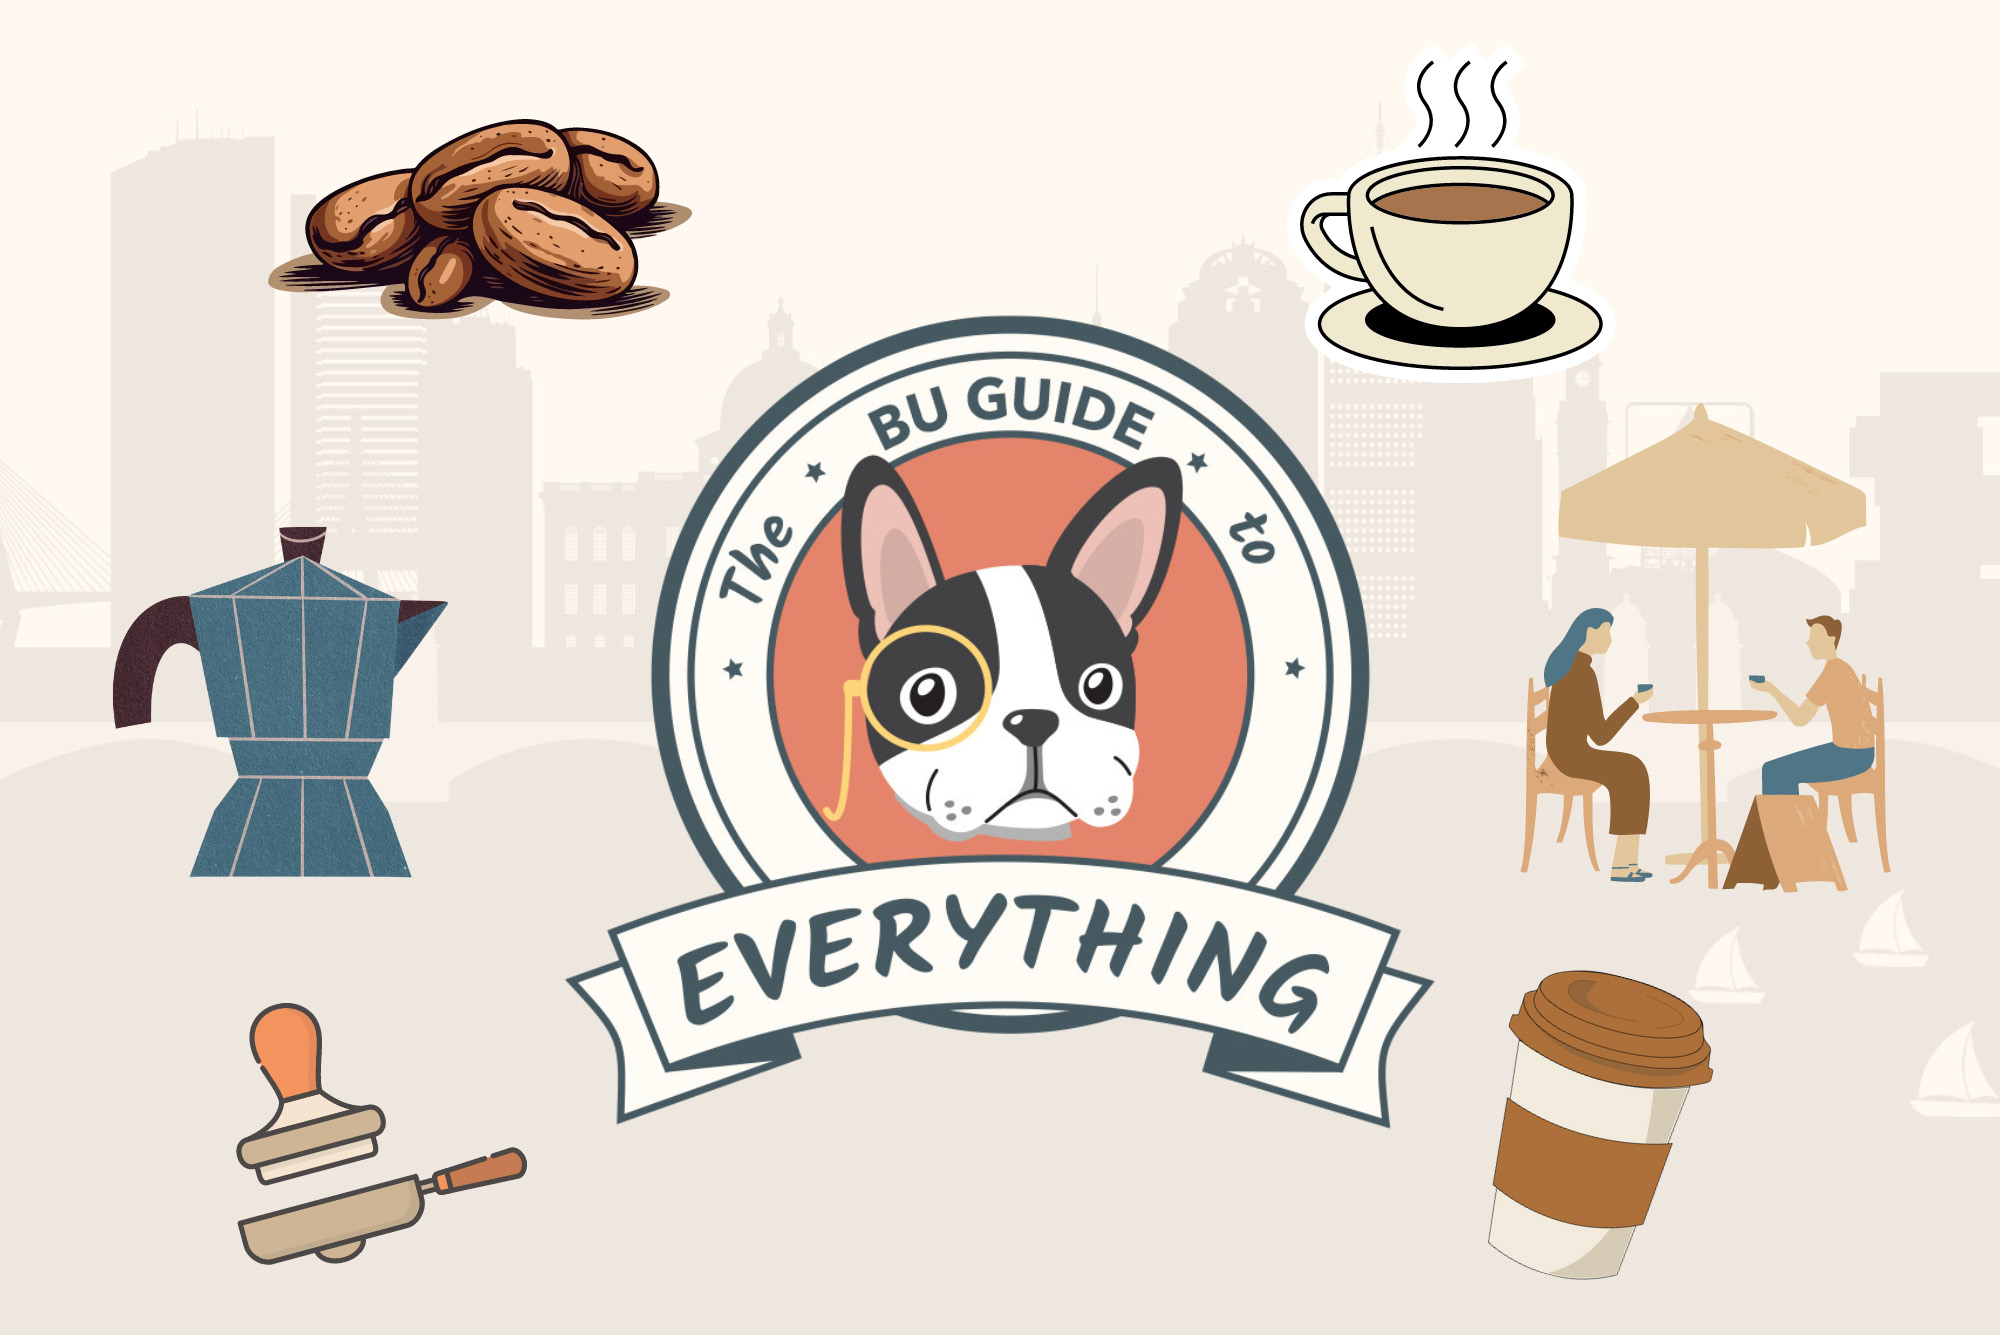 Illustration of a Boston terrier in the center of a red circle with text surround reading "The BU Guide to Everything". There are vector images of coffee mugs and beans next to the dog